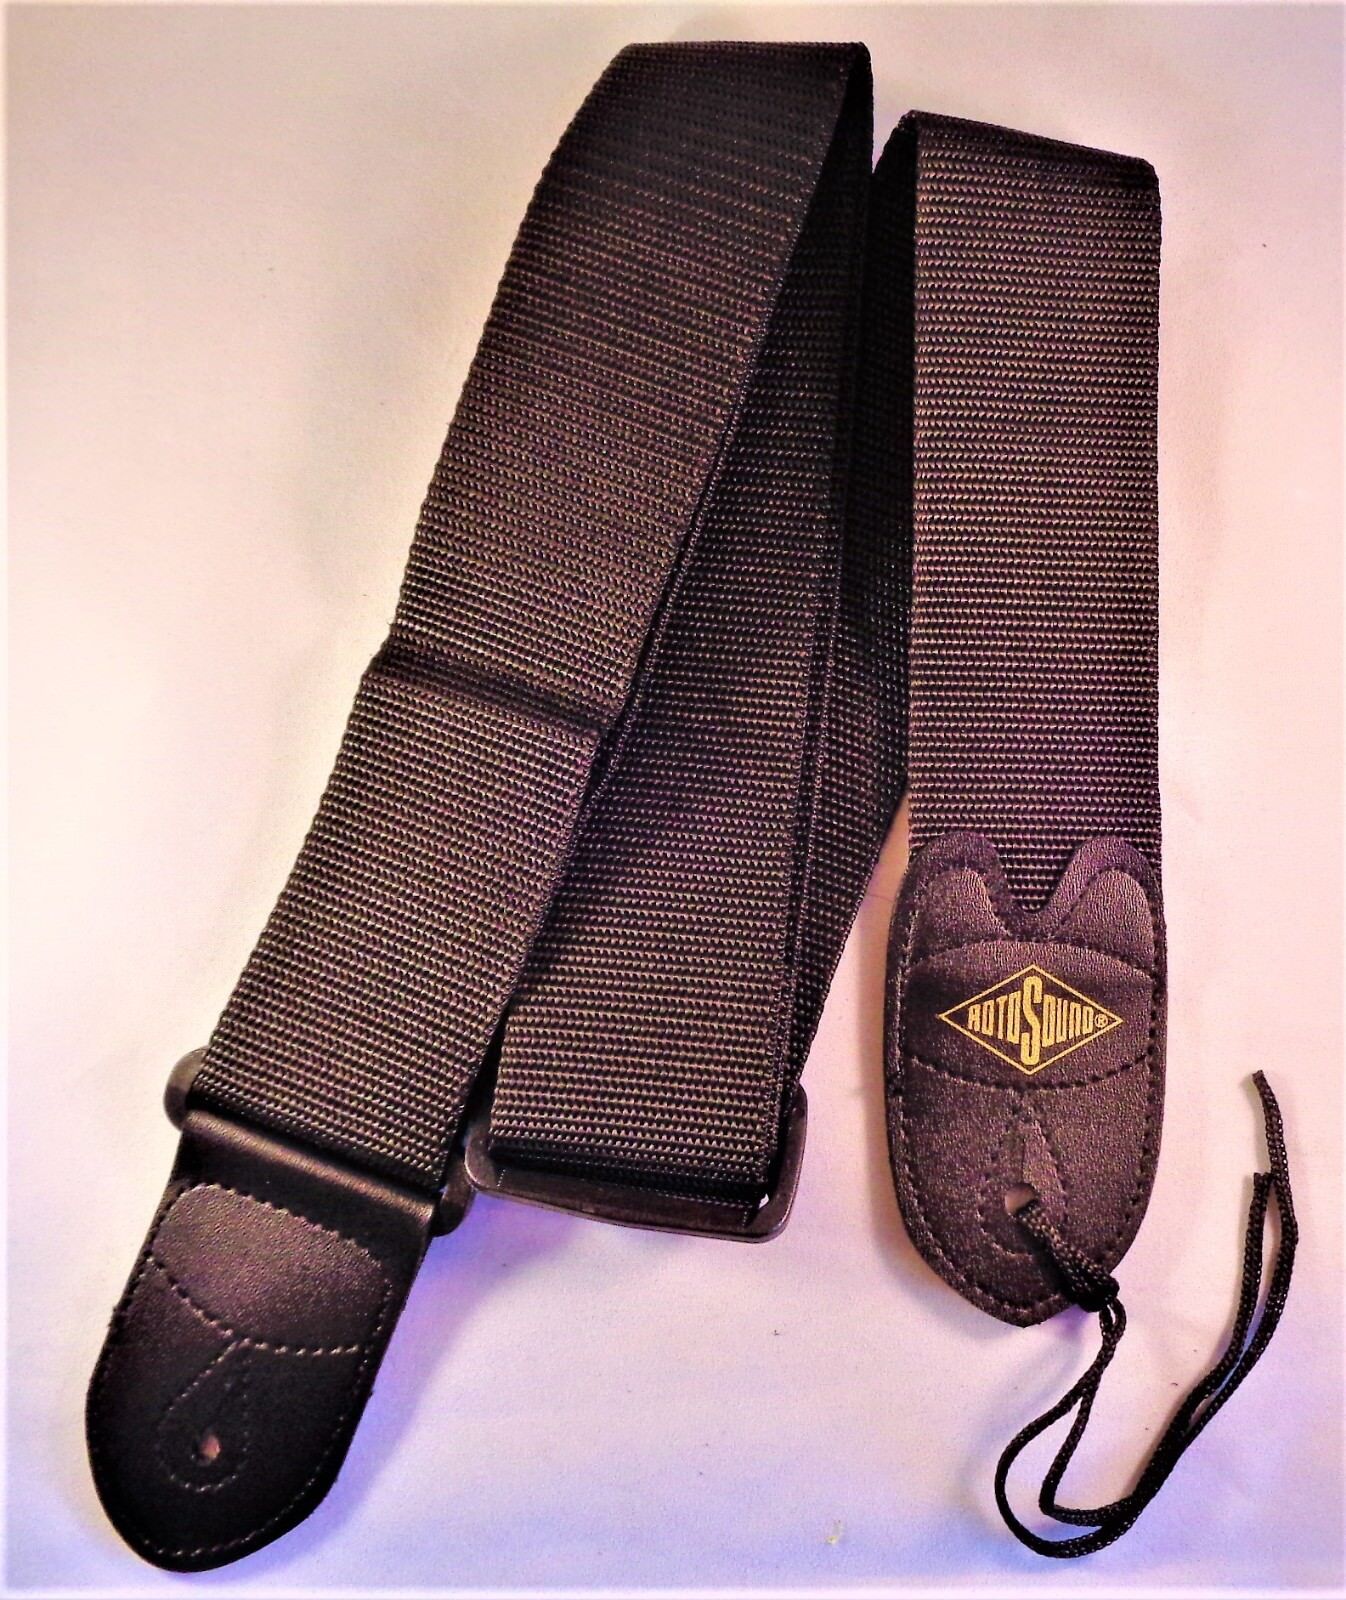 RotoSound Guitar Strap with Leather Ends for Electric/Guitar/Bass (Black STR1).